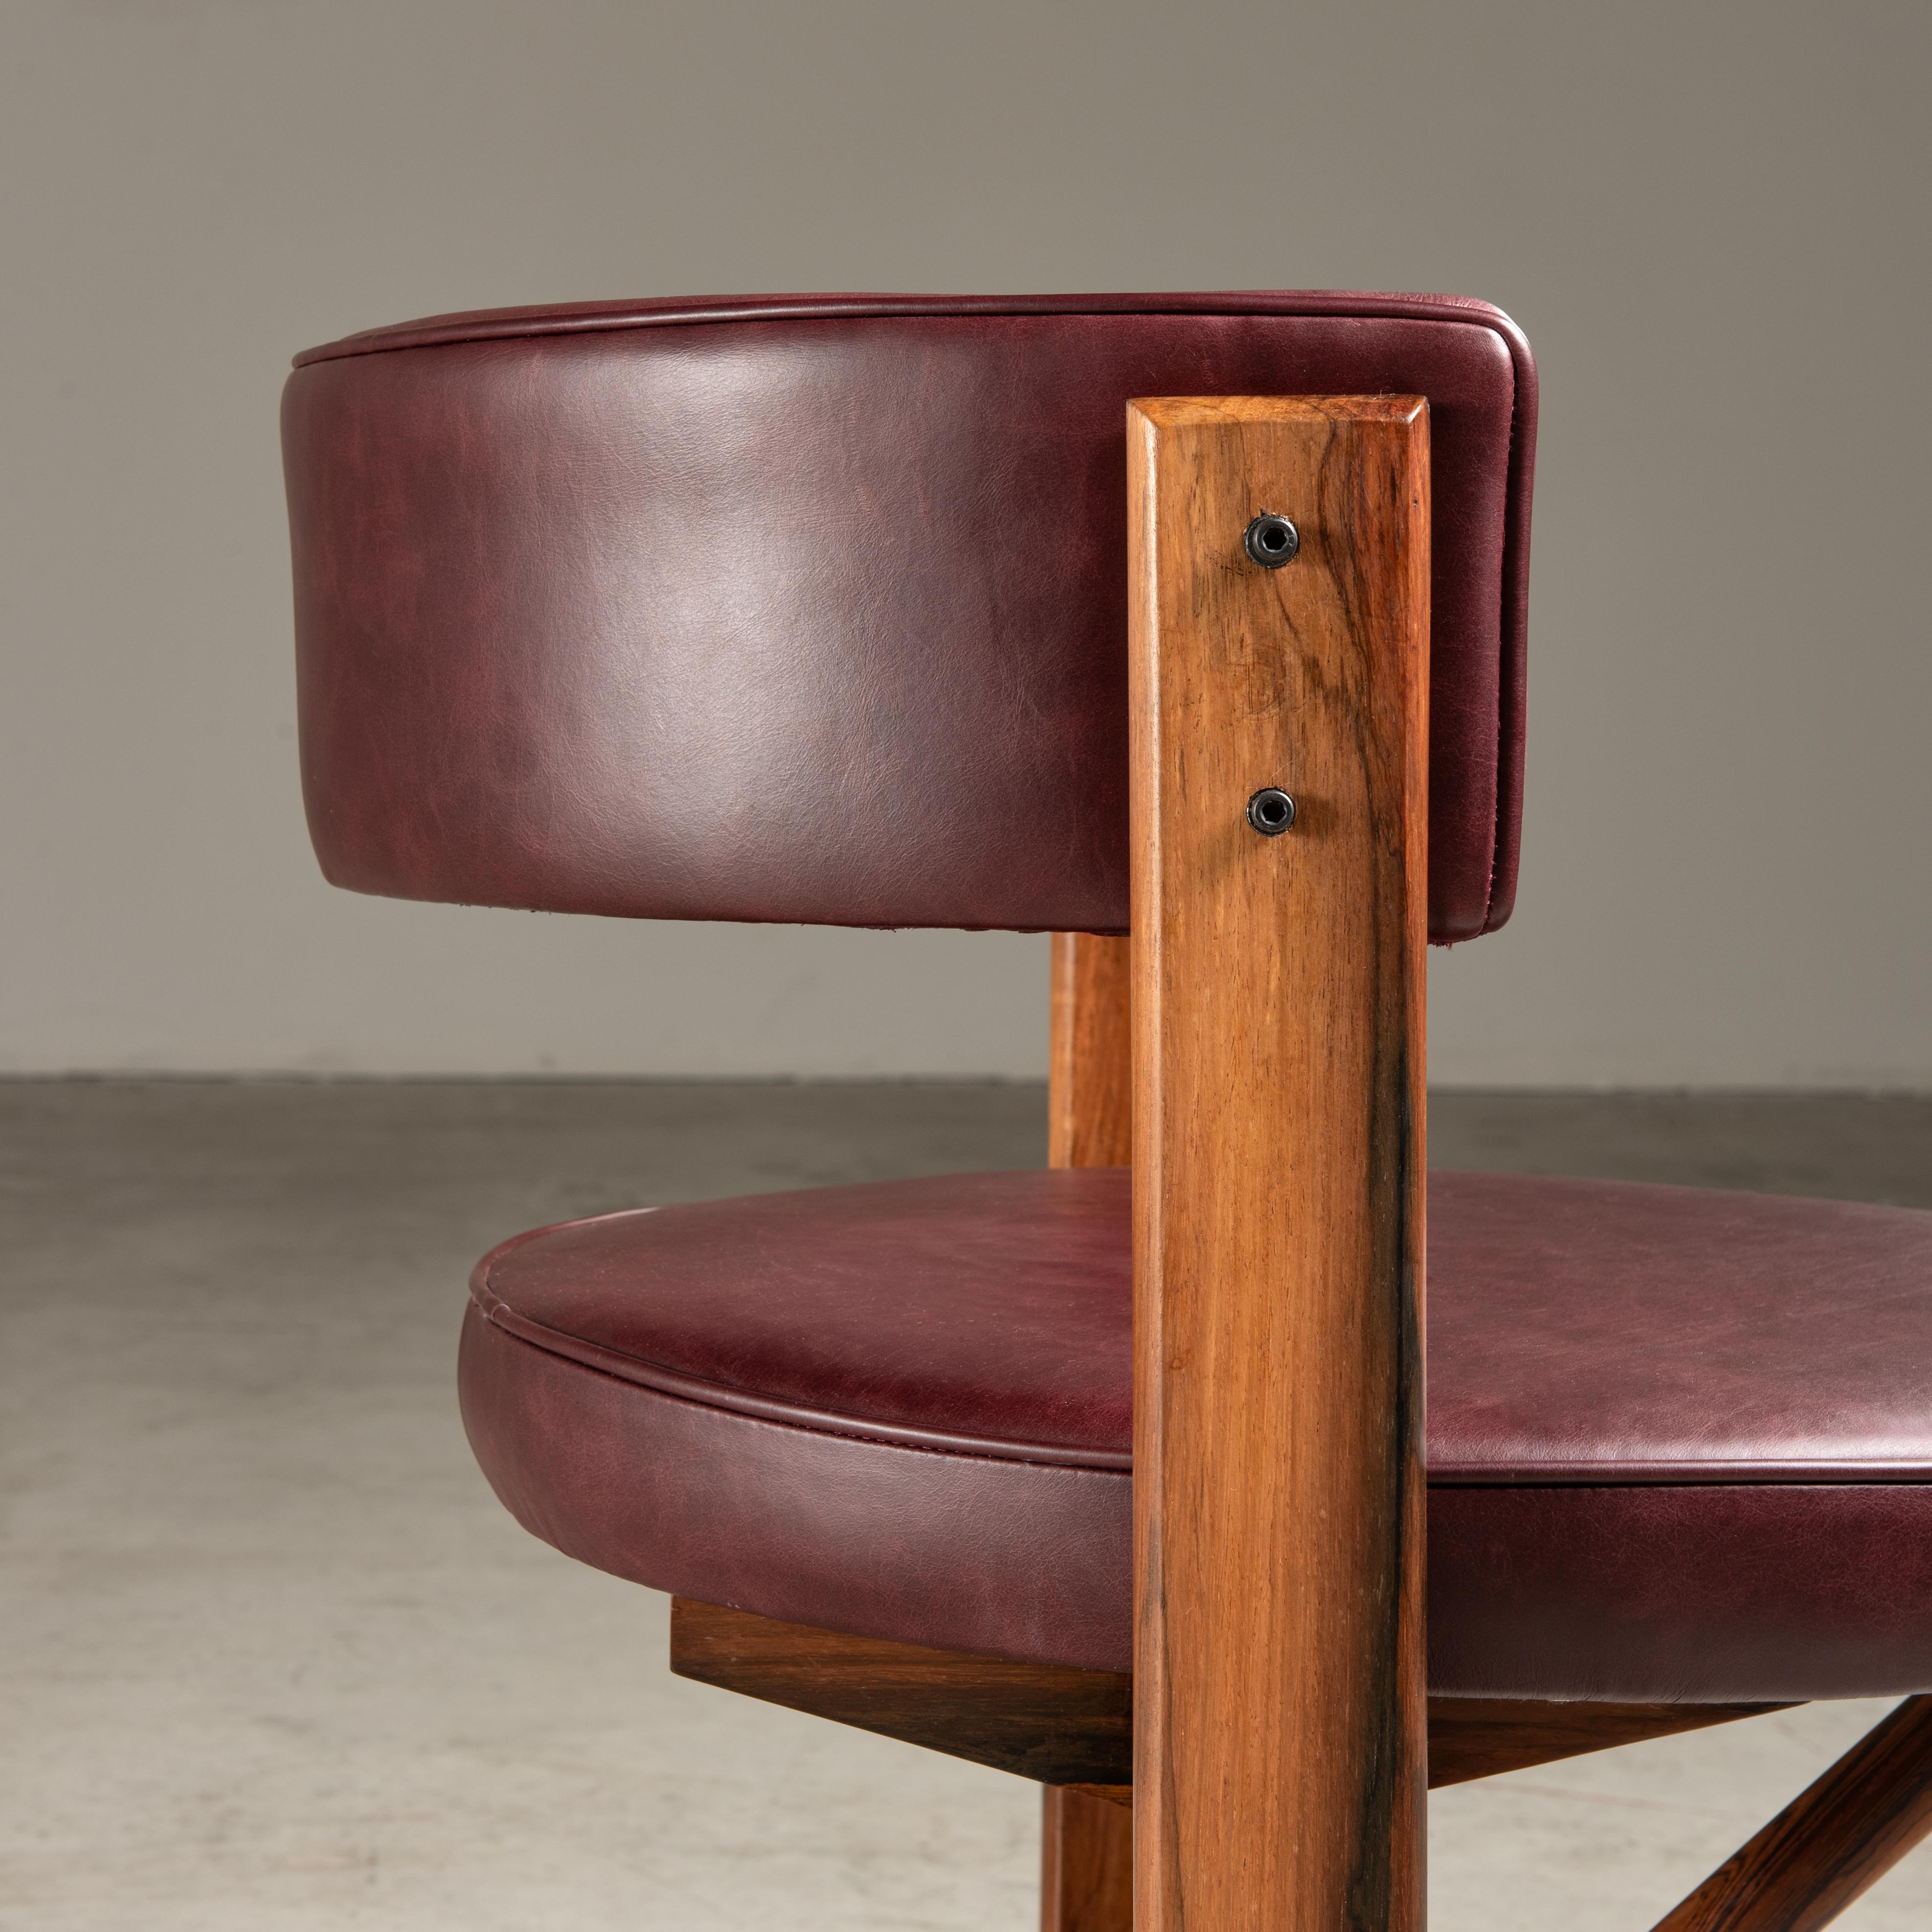 Round Modernist Wood and Leather Chair, Brazilian Mid-Century Design  In Good Condition For Sale In Sao Paulo, SP